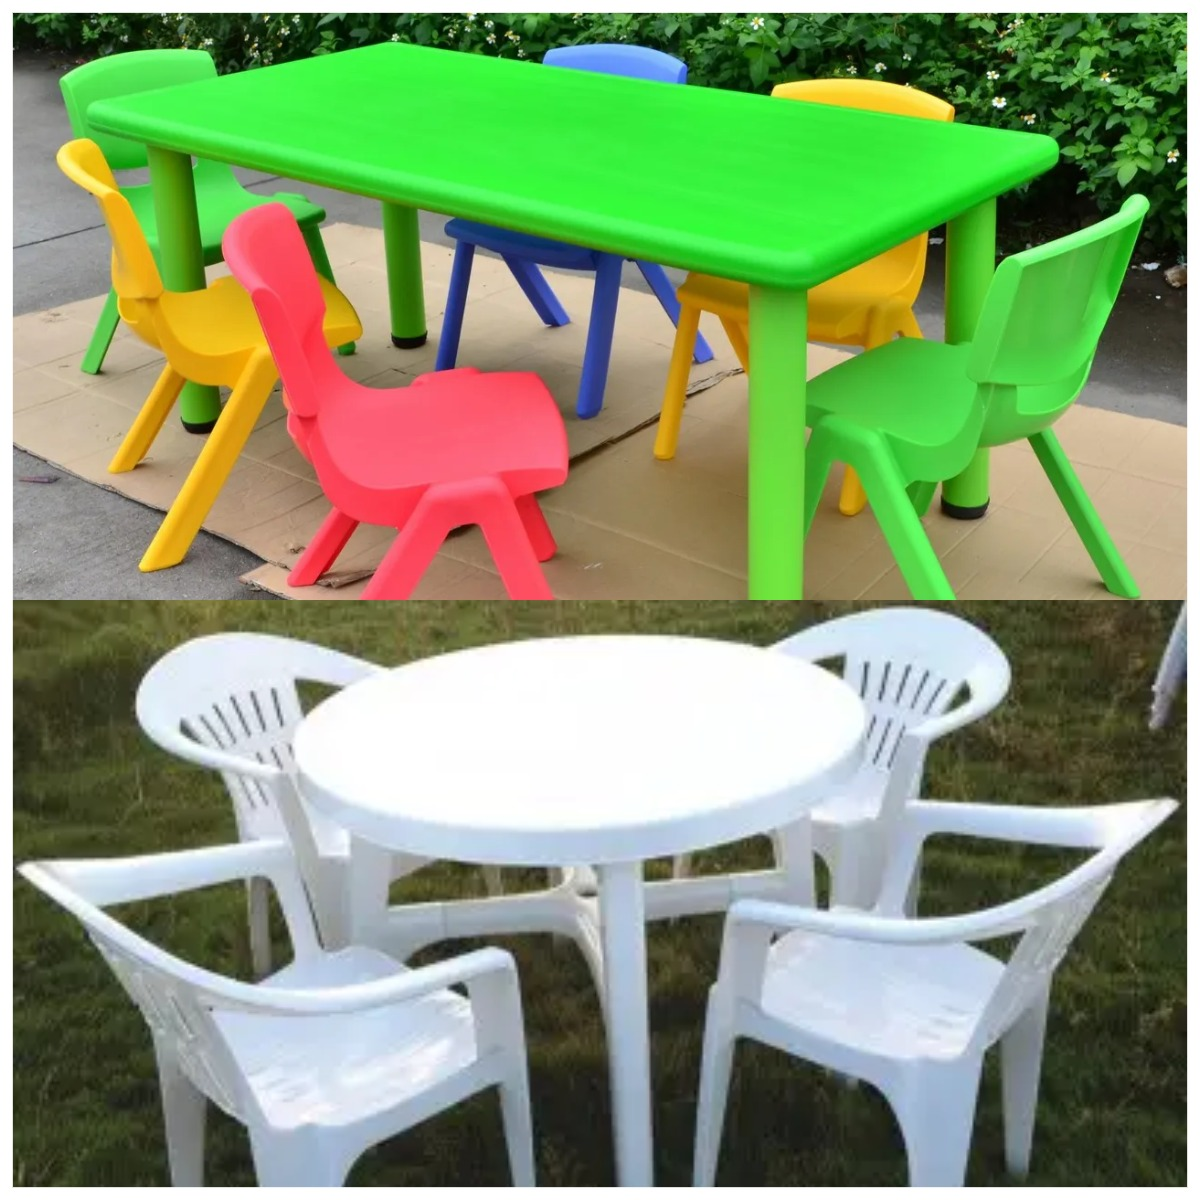 Plastic tables and chairs how to clean it？